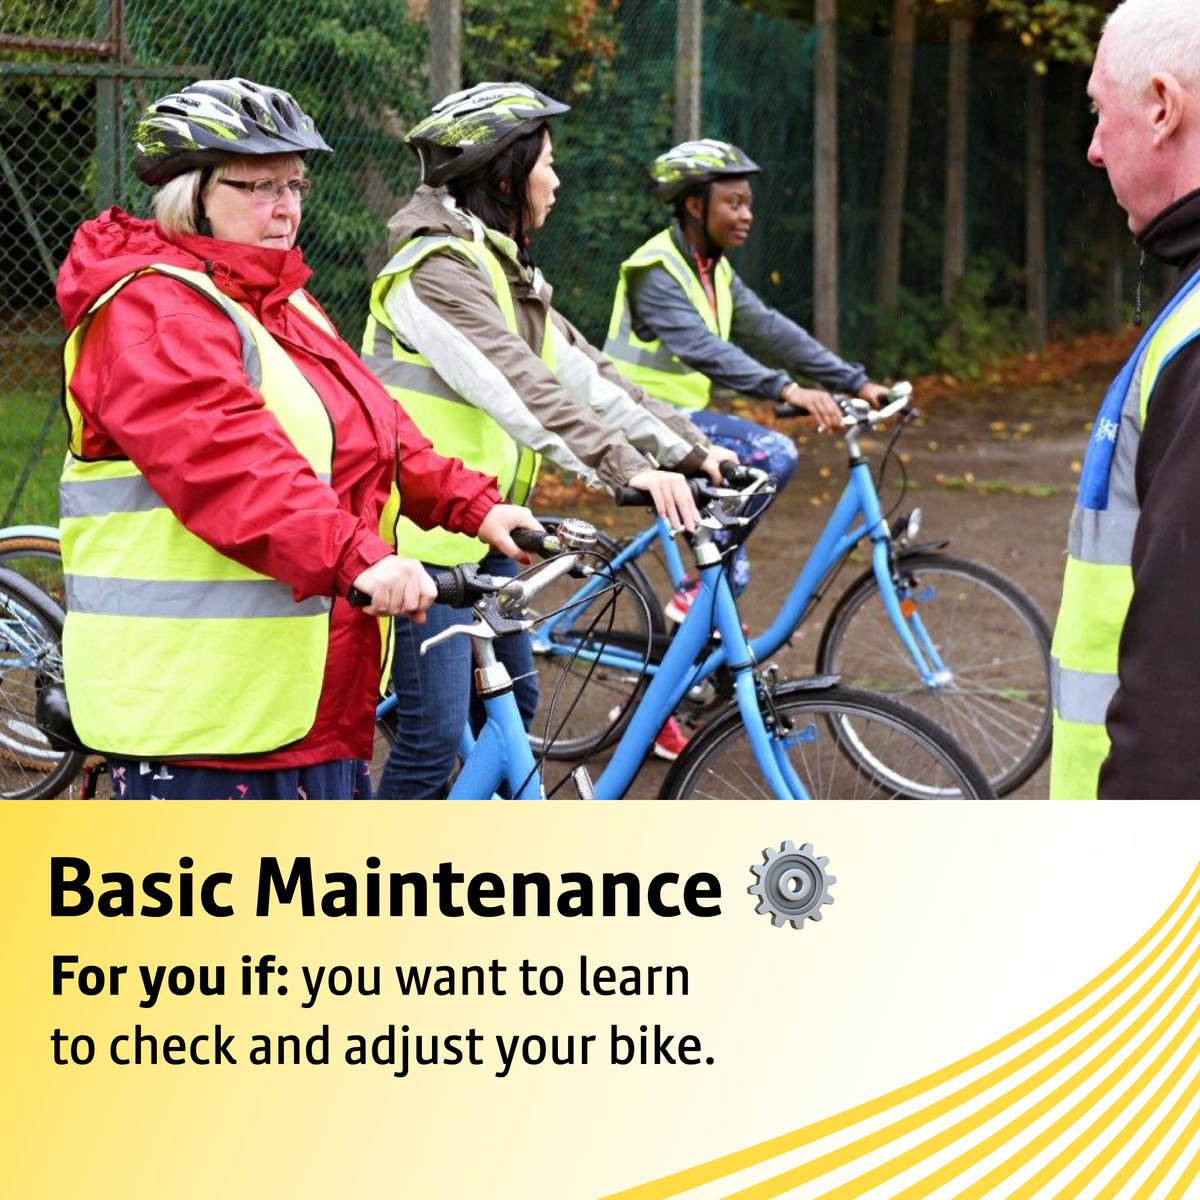 We're running a #BikeMaintenance course on Thursday 6th June 3-5pm, led by a bike maintenance expert 🚲For £10, it's a hands-on session that will give you the confidence and skills to keep your bike on the move! Book your place here 👉ow.ly/WAhq50Rsinn @BeeNetwork